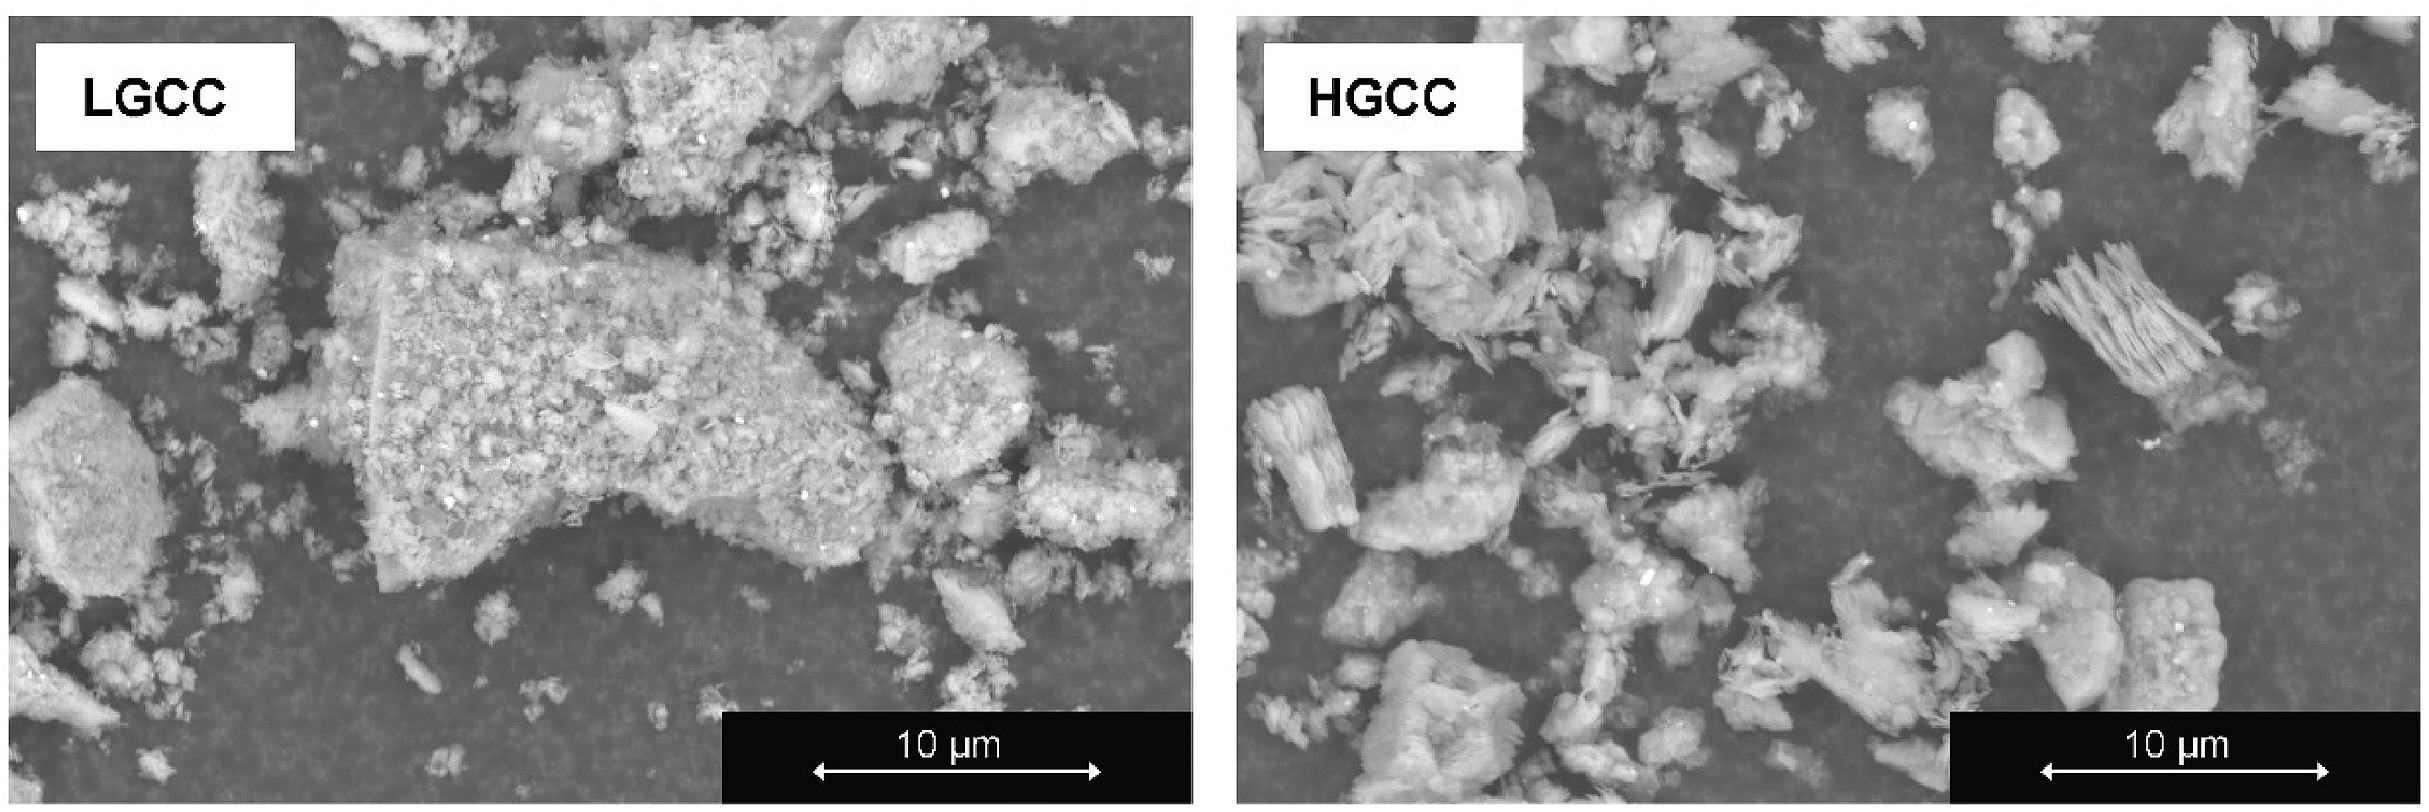 Electron micrographs of low-grade (left) and high-grade (right) calcined clay. Image via TU Delft.